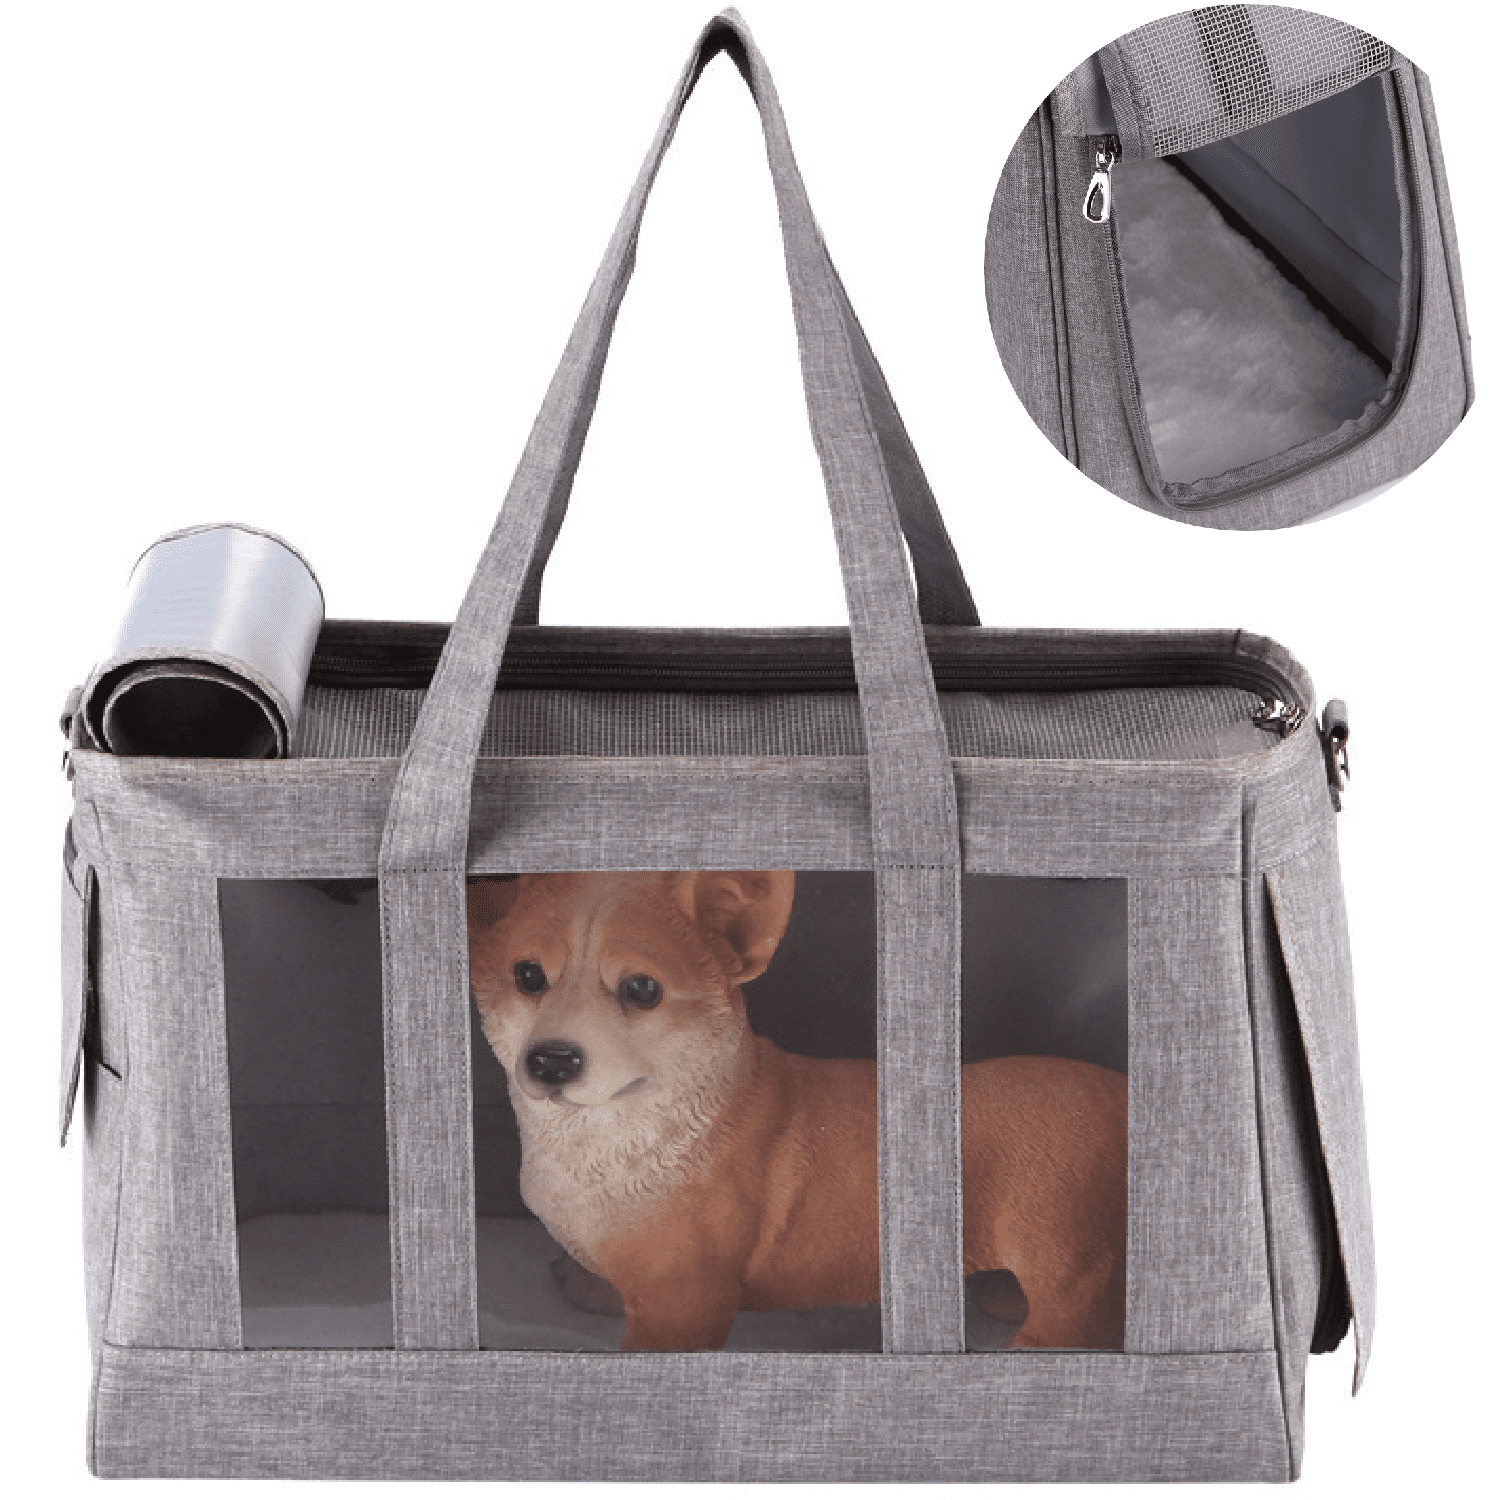 Jinjiu Pet Carrier Bag, Jinjiu 4 Sides Mesh Surfaces Dog Carrier Bag, More Breathable, Airline Approved Soft Sided Pet Carrier with Locking Safety